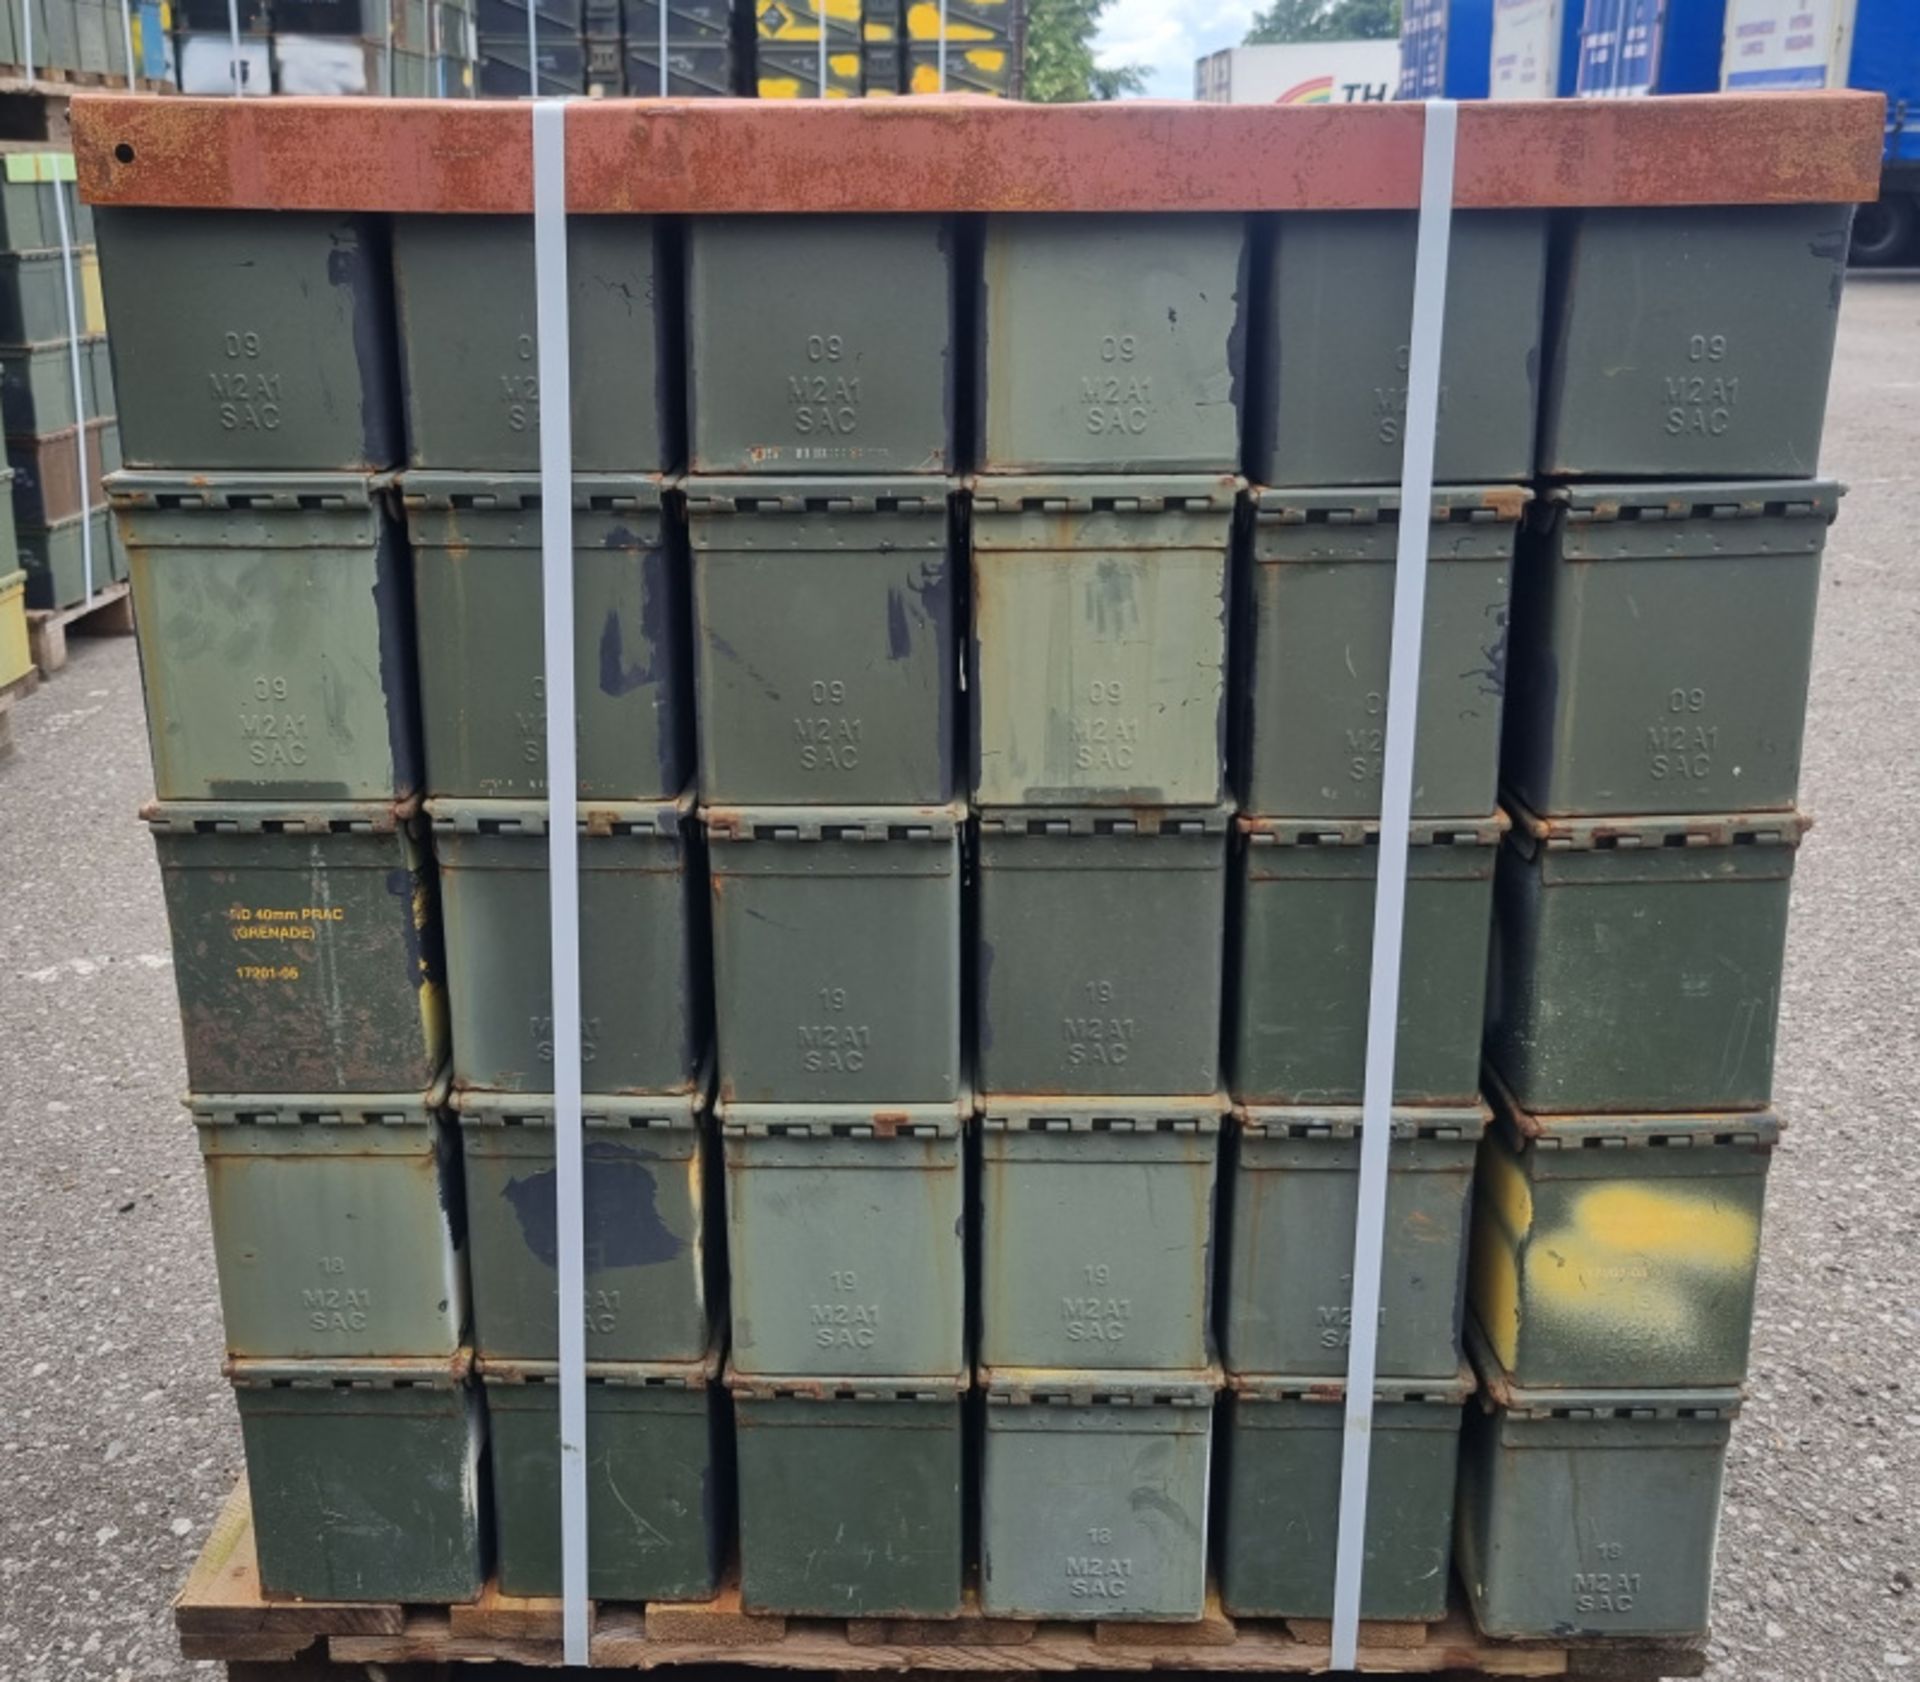 48x Pallets of M2A1 ammo containers - total quantity 5760 - Image 4 of 11